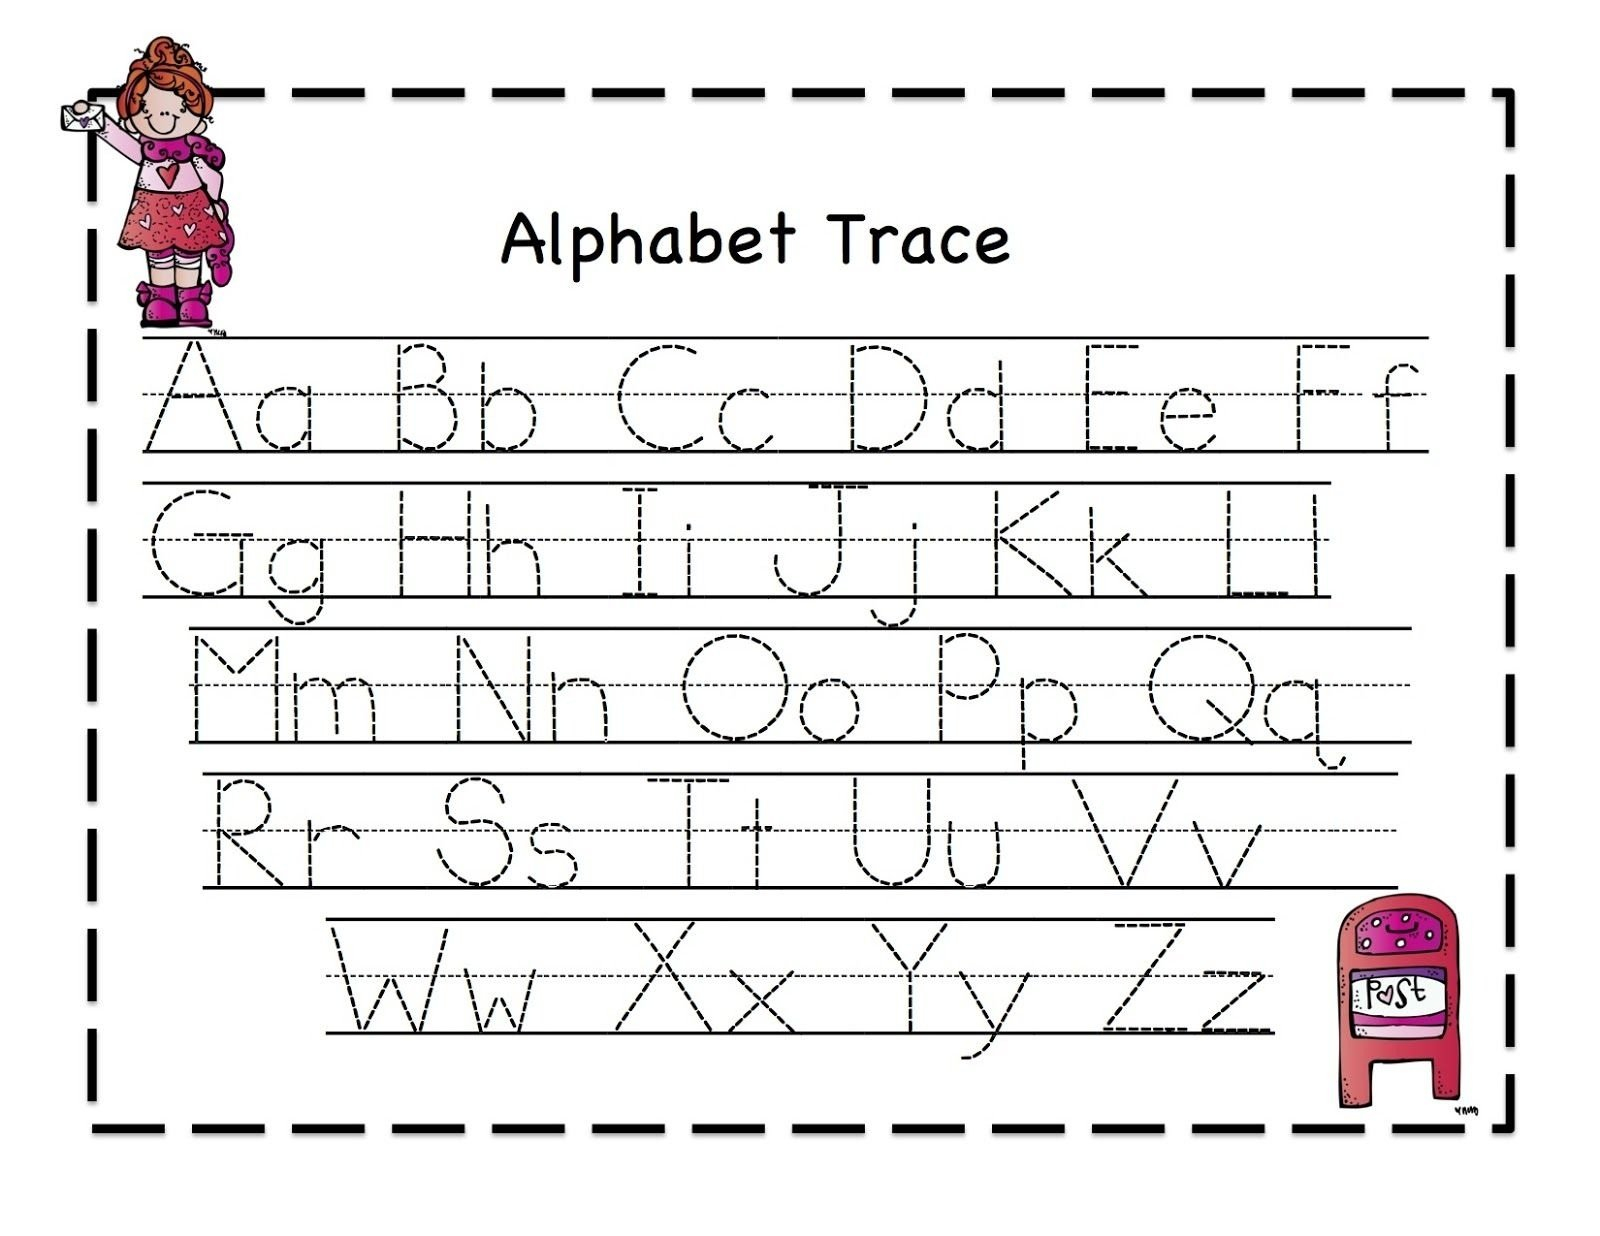 Abc Worksheet For Kindergarten  Writings And Essays Corner Within Abc Worksheets For Preschool